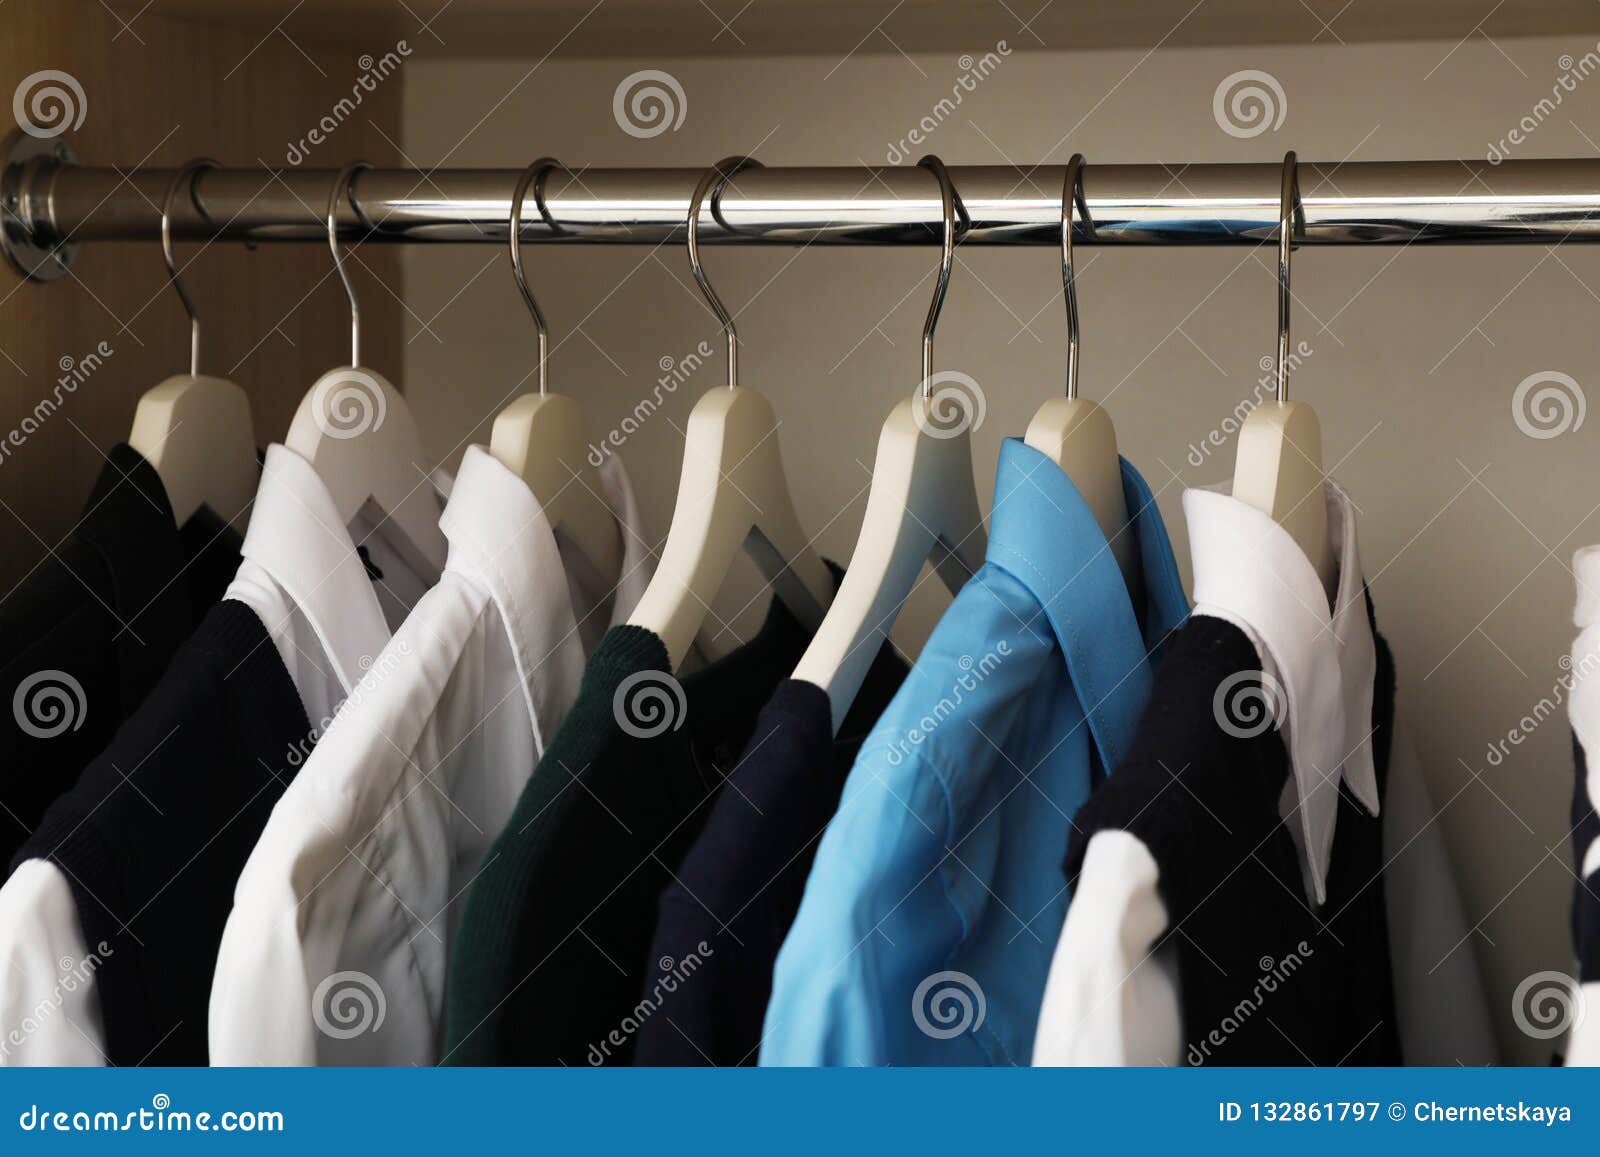 Hangers with Teenage Clothes on Rack in Wardrobe Stock Image - Image of ...